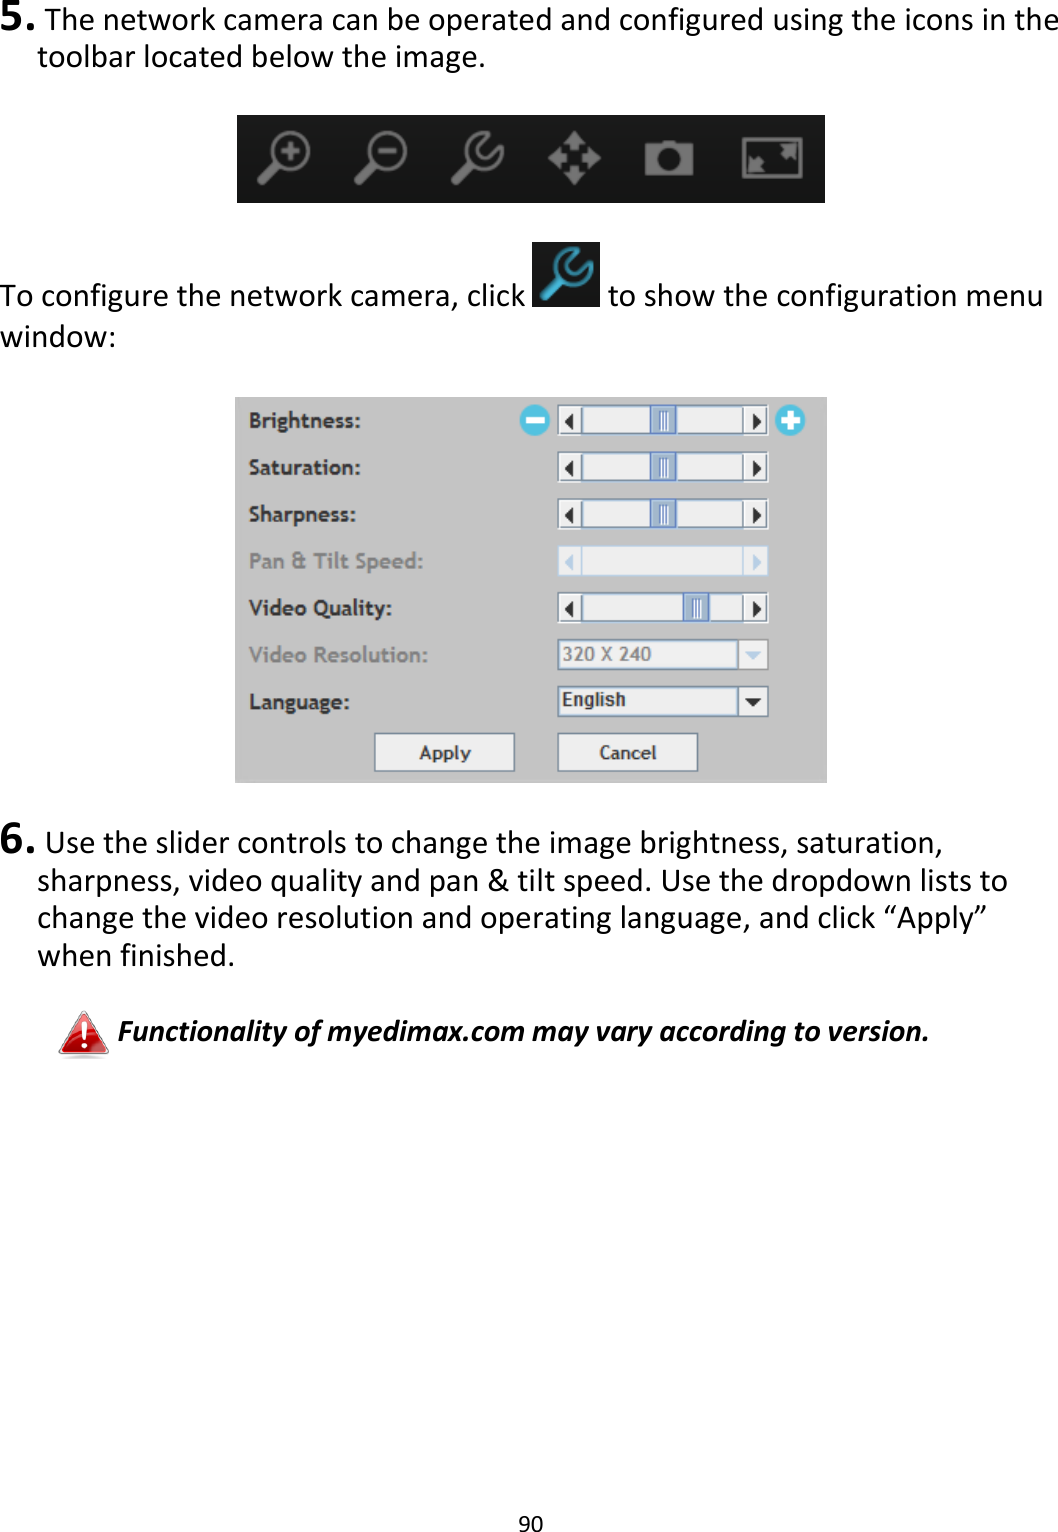 90   5.  The network camera can be operated and configured using the icons in the toolbar located below the image.    To configure the network camera, click   to show the configuration menu window:    6.  Use the slider controls to change the image brightness, saturation, sharpness, video quality and pan &amp; tilt speed. Use the dropdown lists to change the video resolution and operating language, and click “Apply” when finished.  Functionality of myedimax.com may vary according to version. 